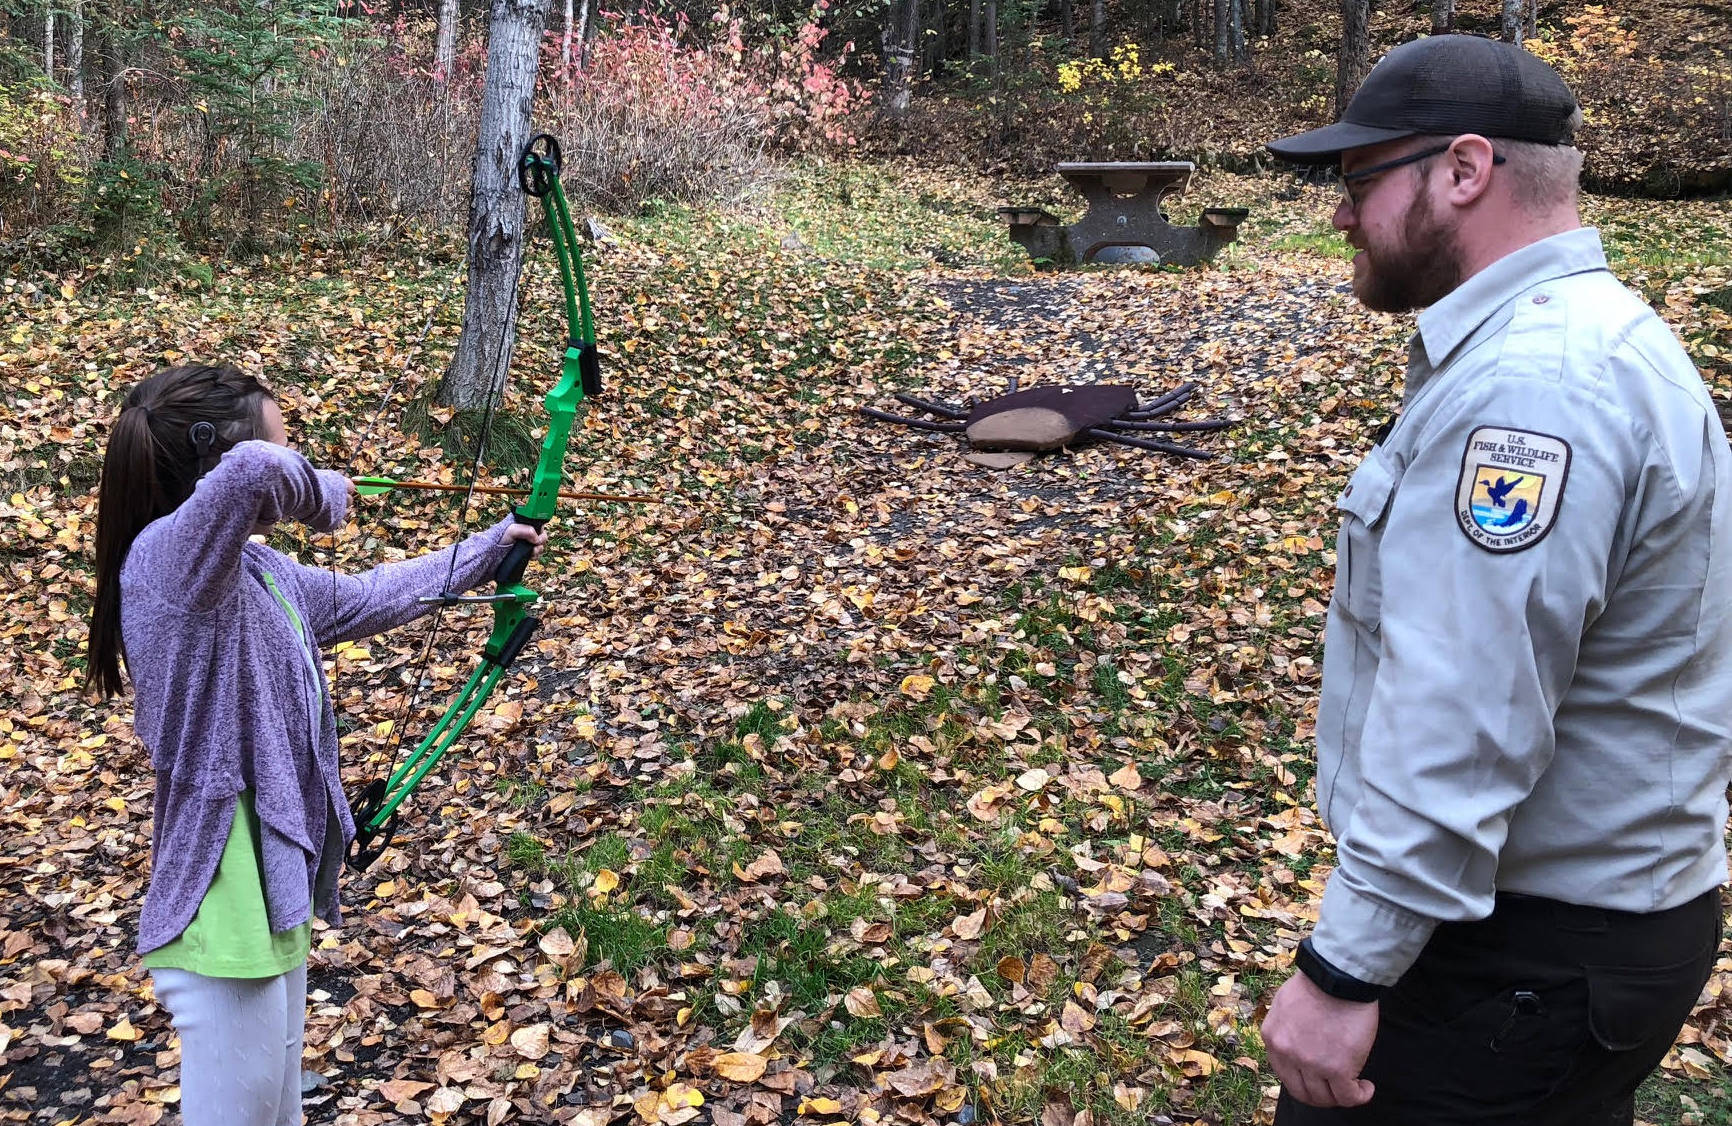 Participants at the 2018 Termination Dust Celebration took aim at invasive species like ticks and earthworks while learning archery skills. (Photo by Leah Eskelin/USFWS)